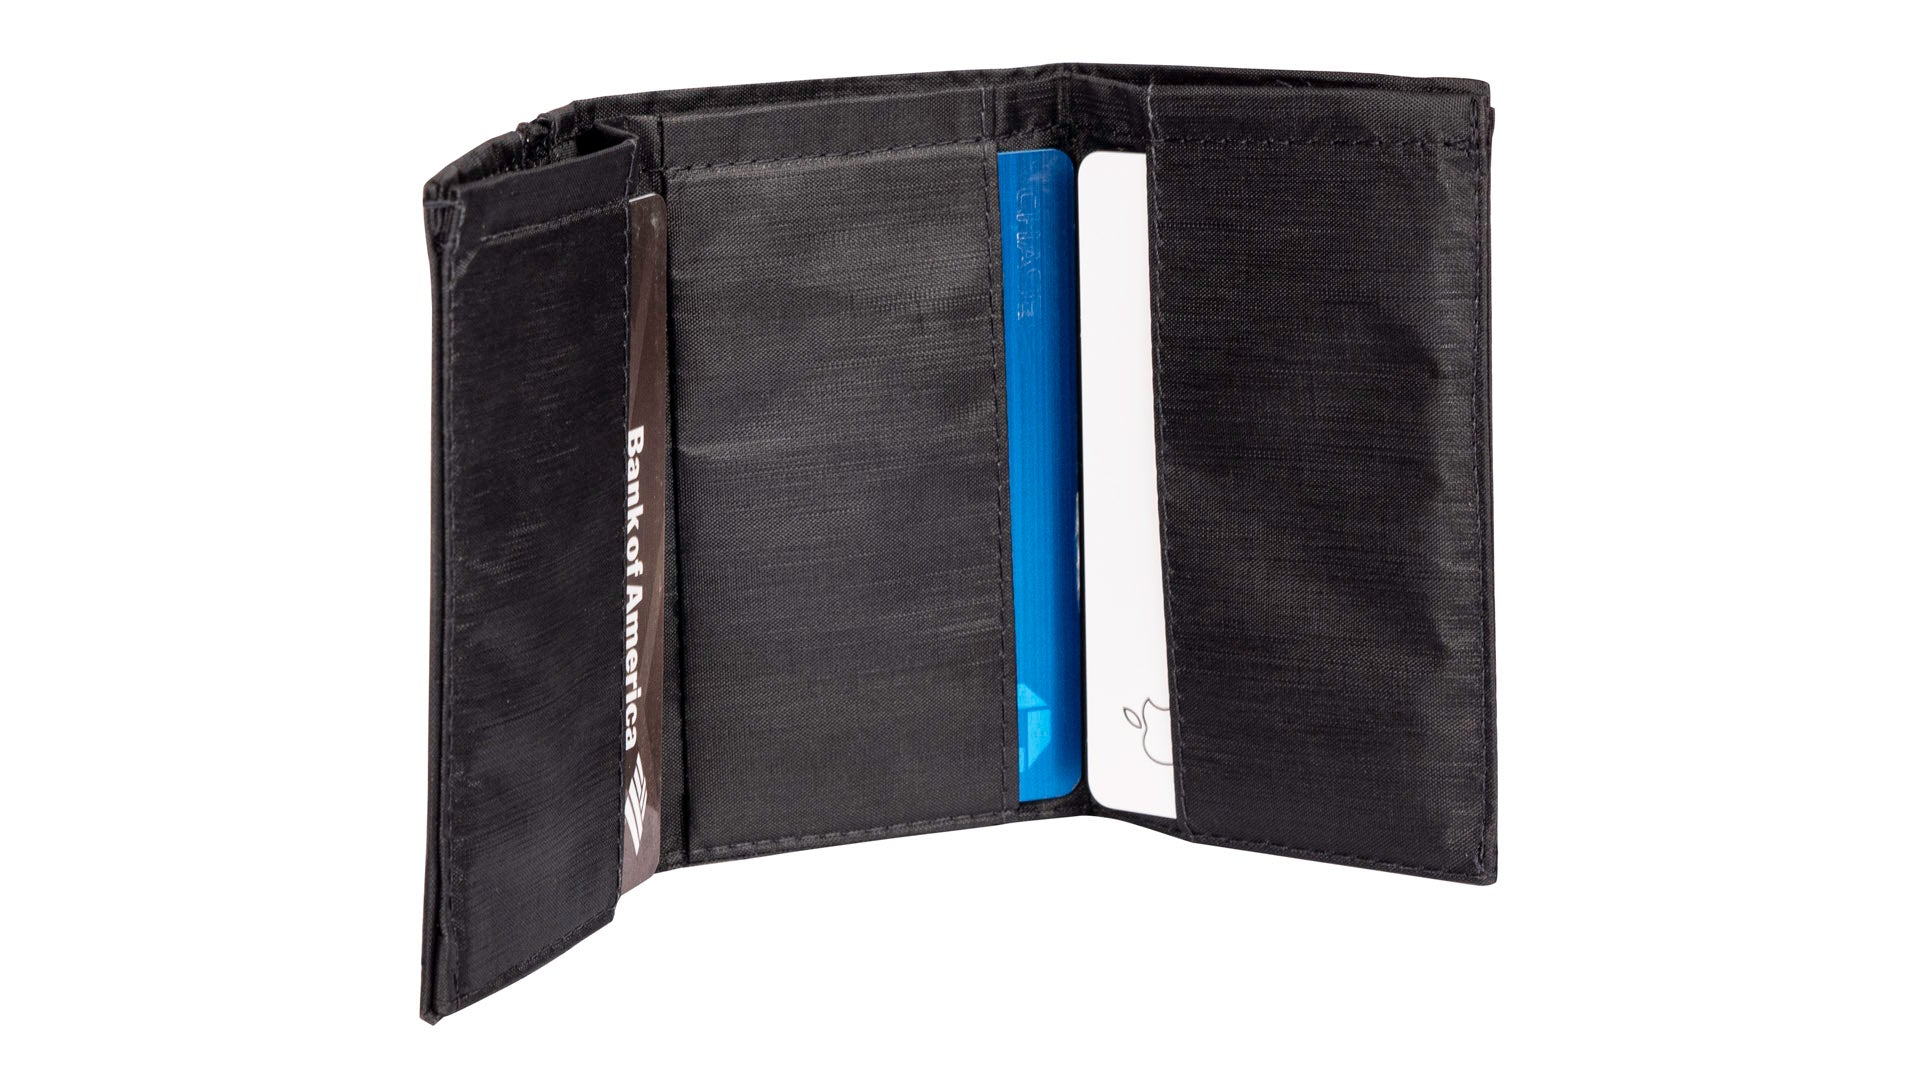 Trifold Chain Wallet #WC30423 - Jamin Leather®